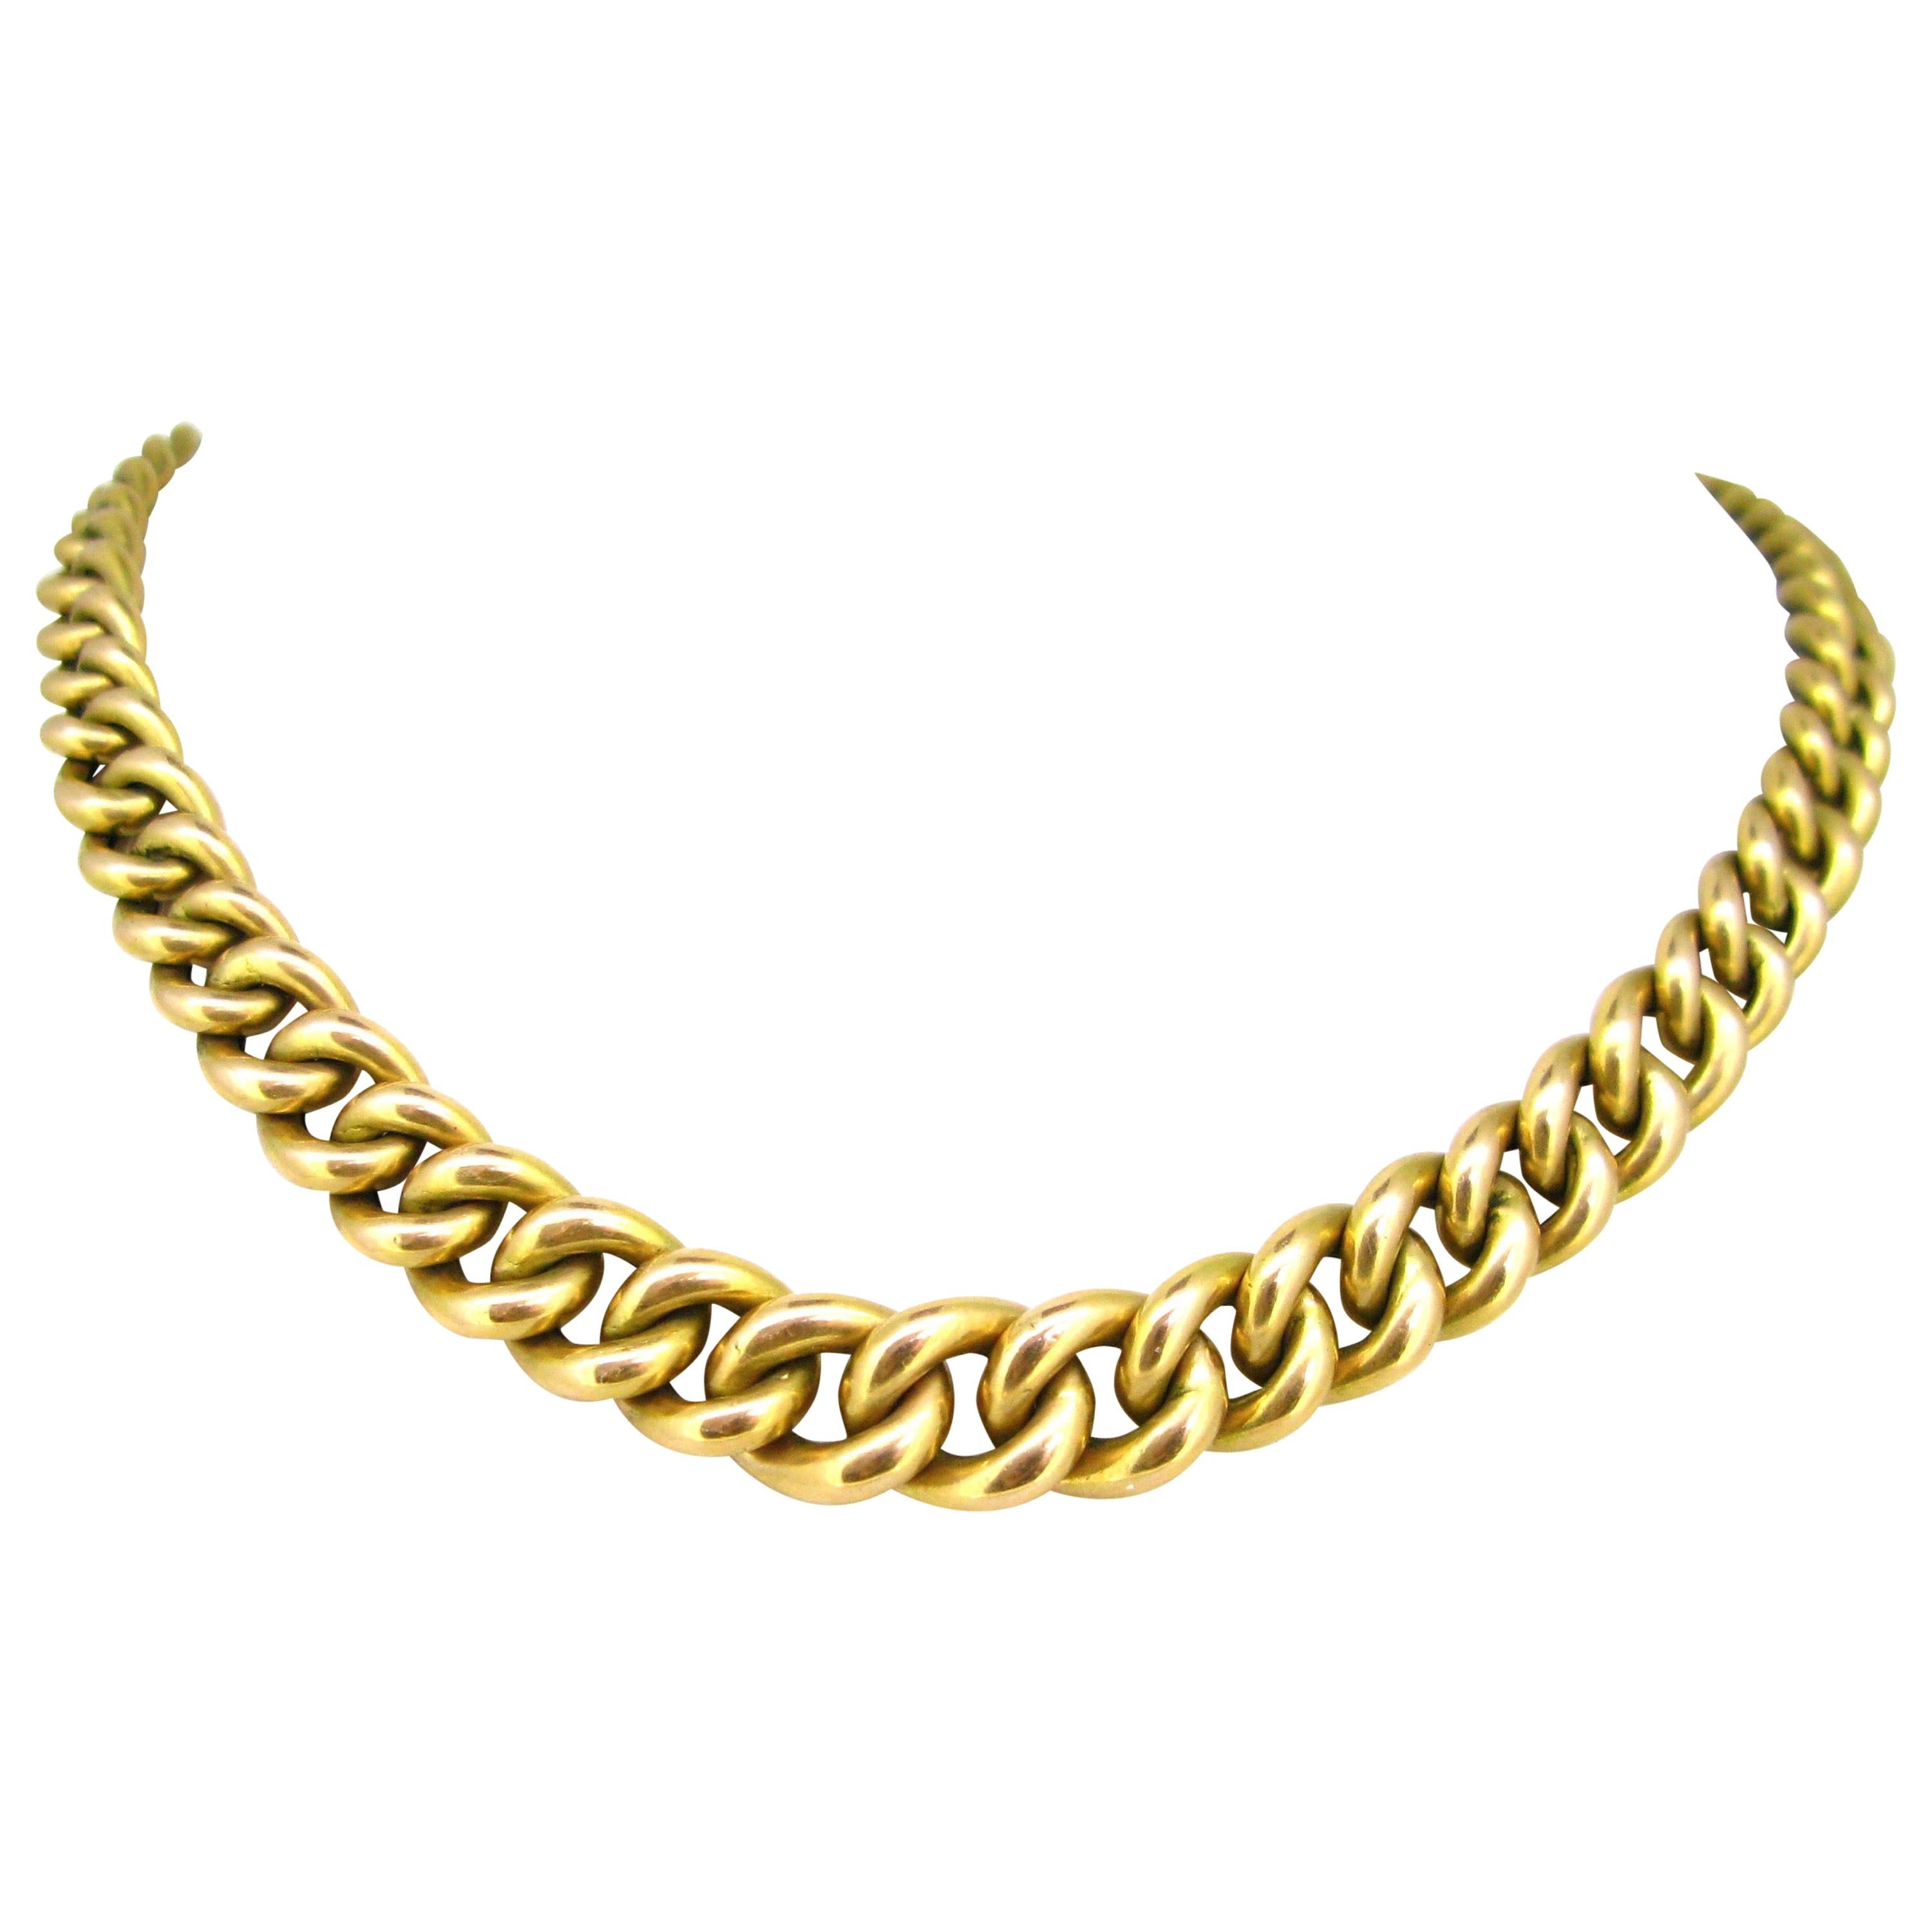 Chunky Graduated Curb Links Yellow Gold Necklace